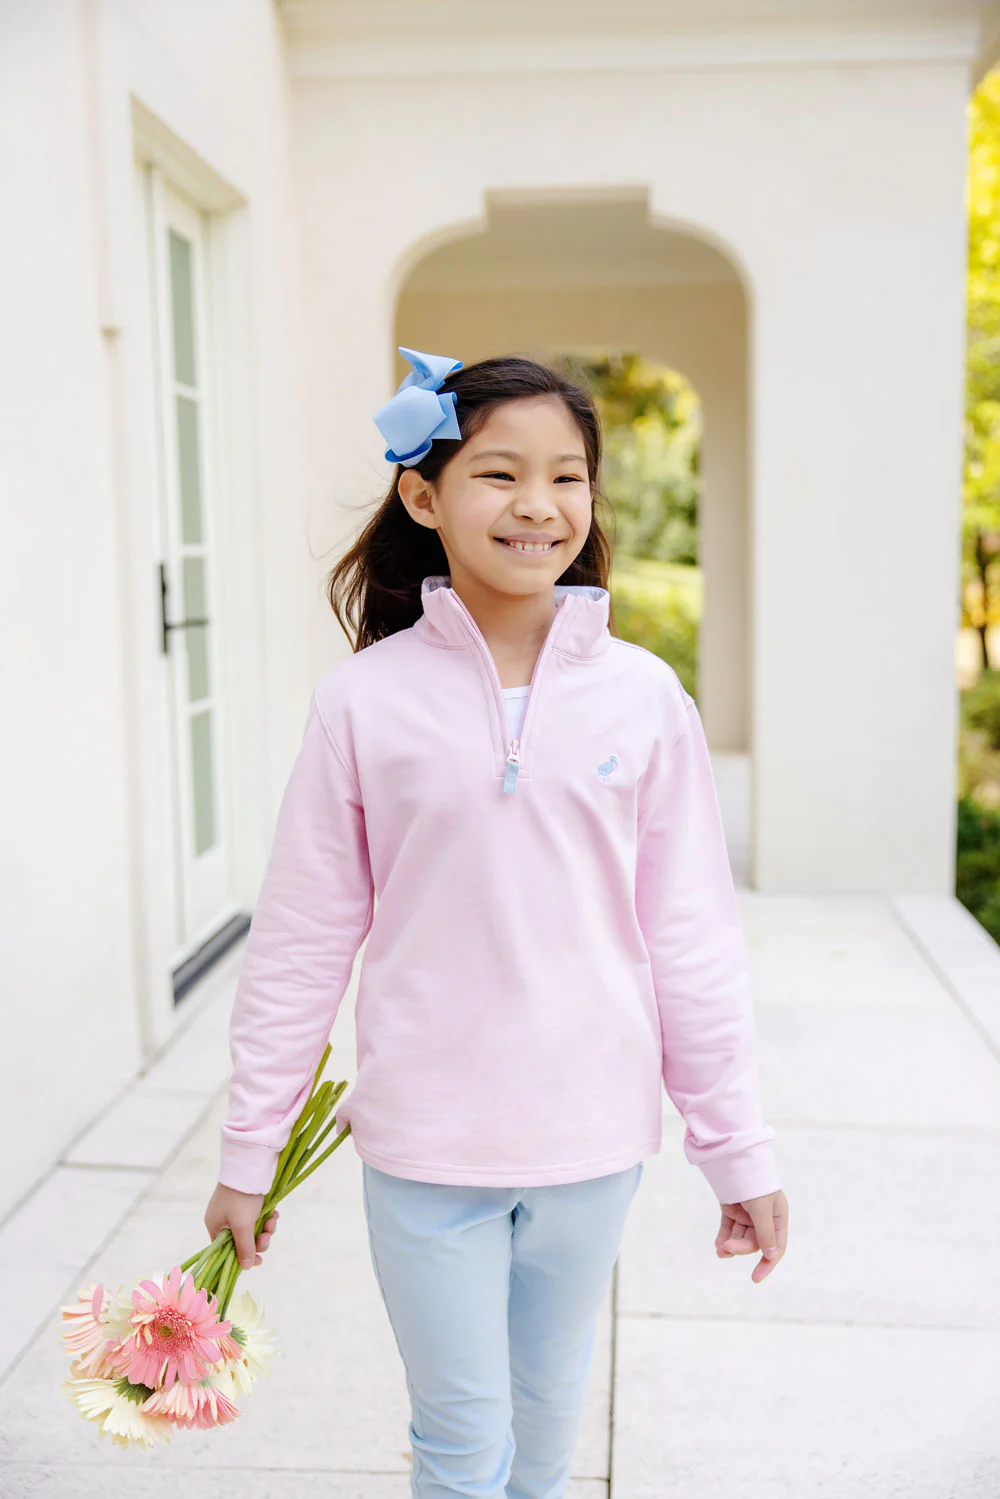 Canter Collar Half-Zip in Palm Beach Pink with Buckhead Blue